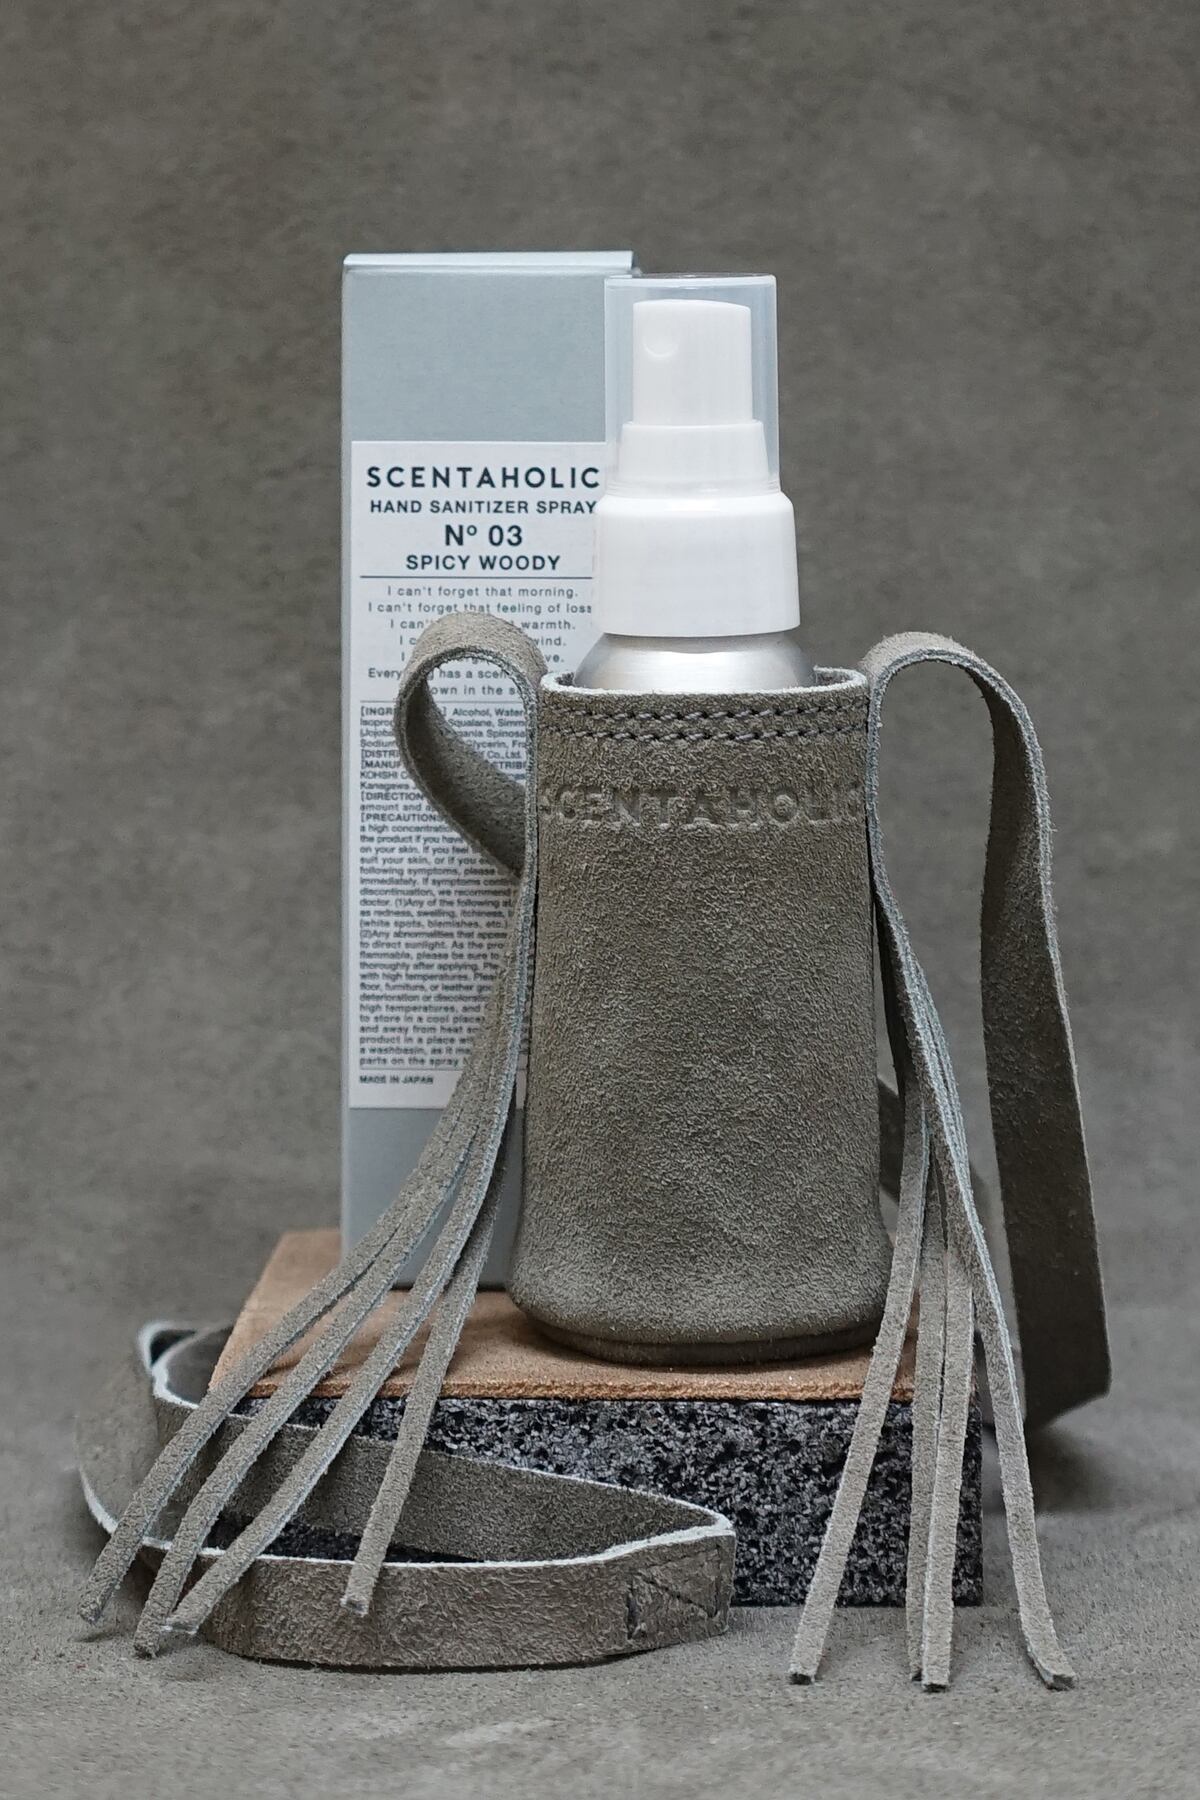 HAND SANITIZER SPRAY CARRYING LEATHER CASE